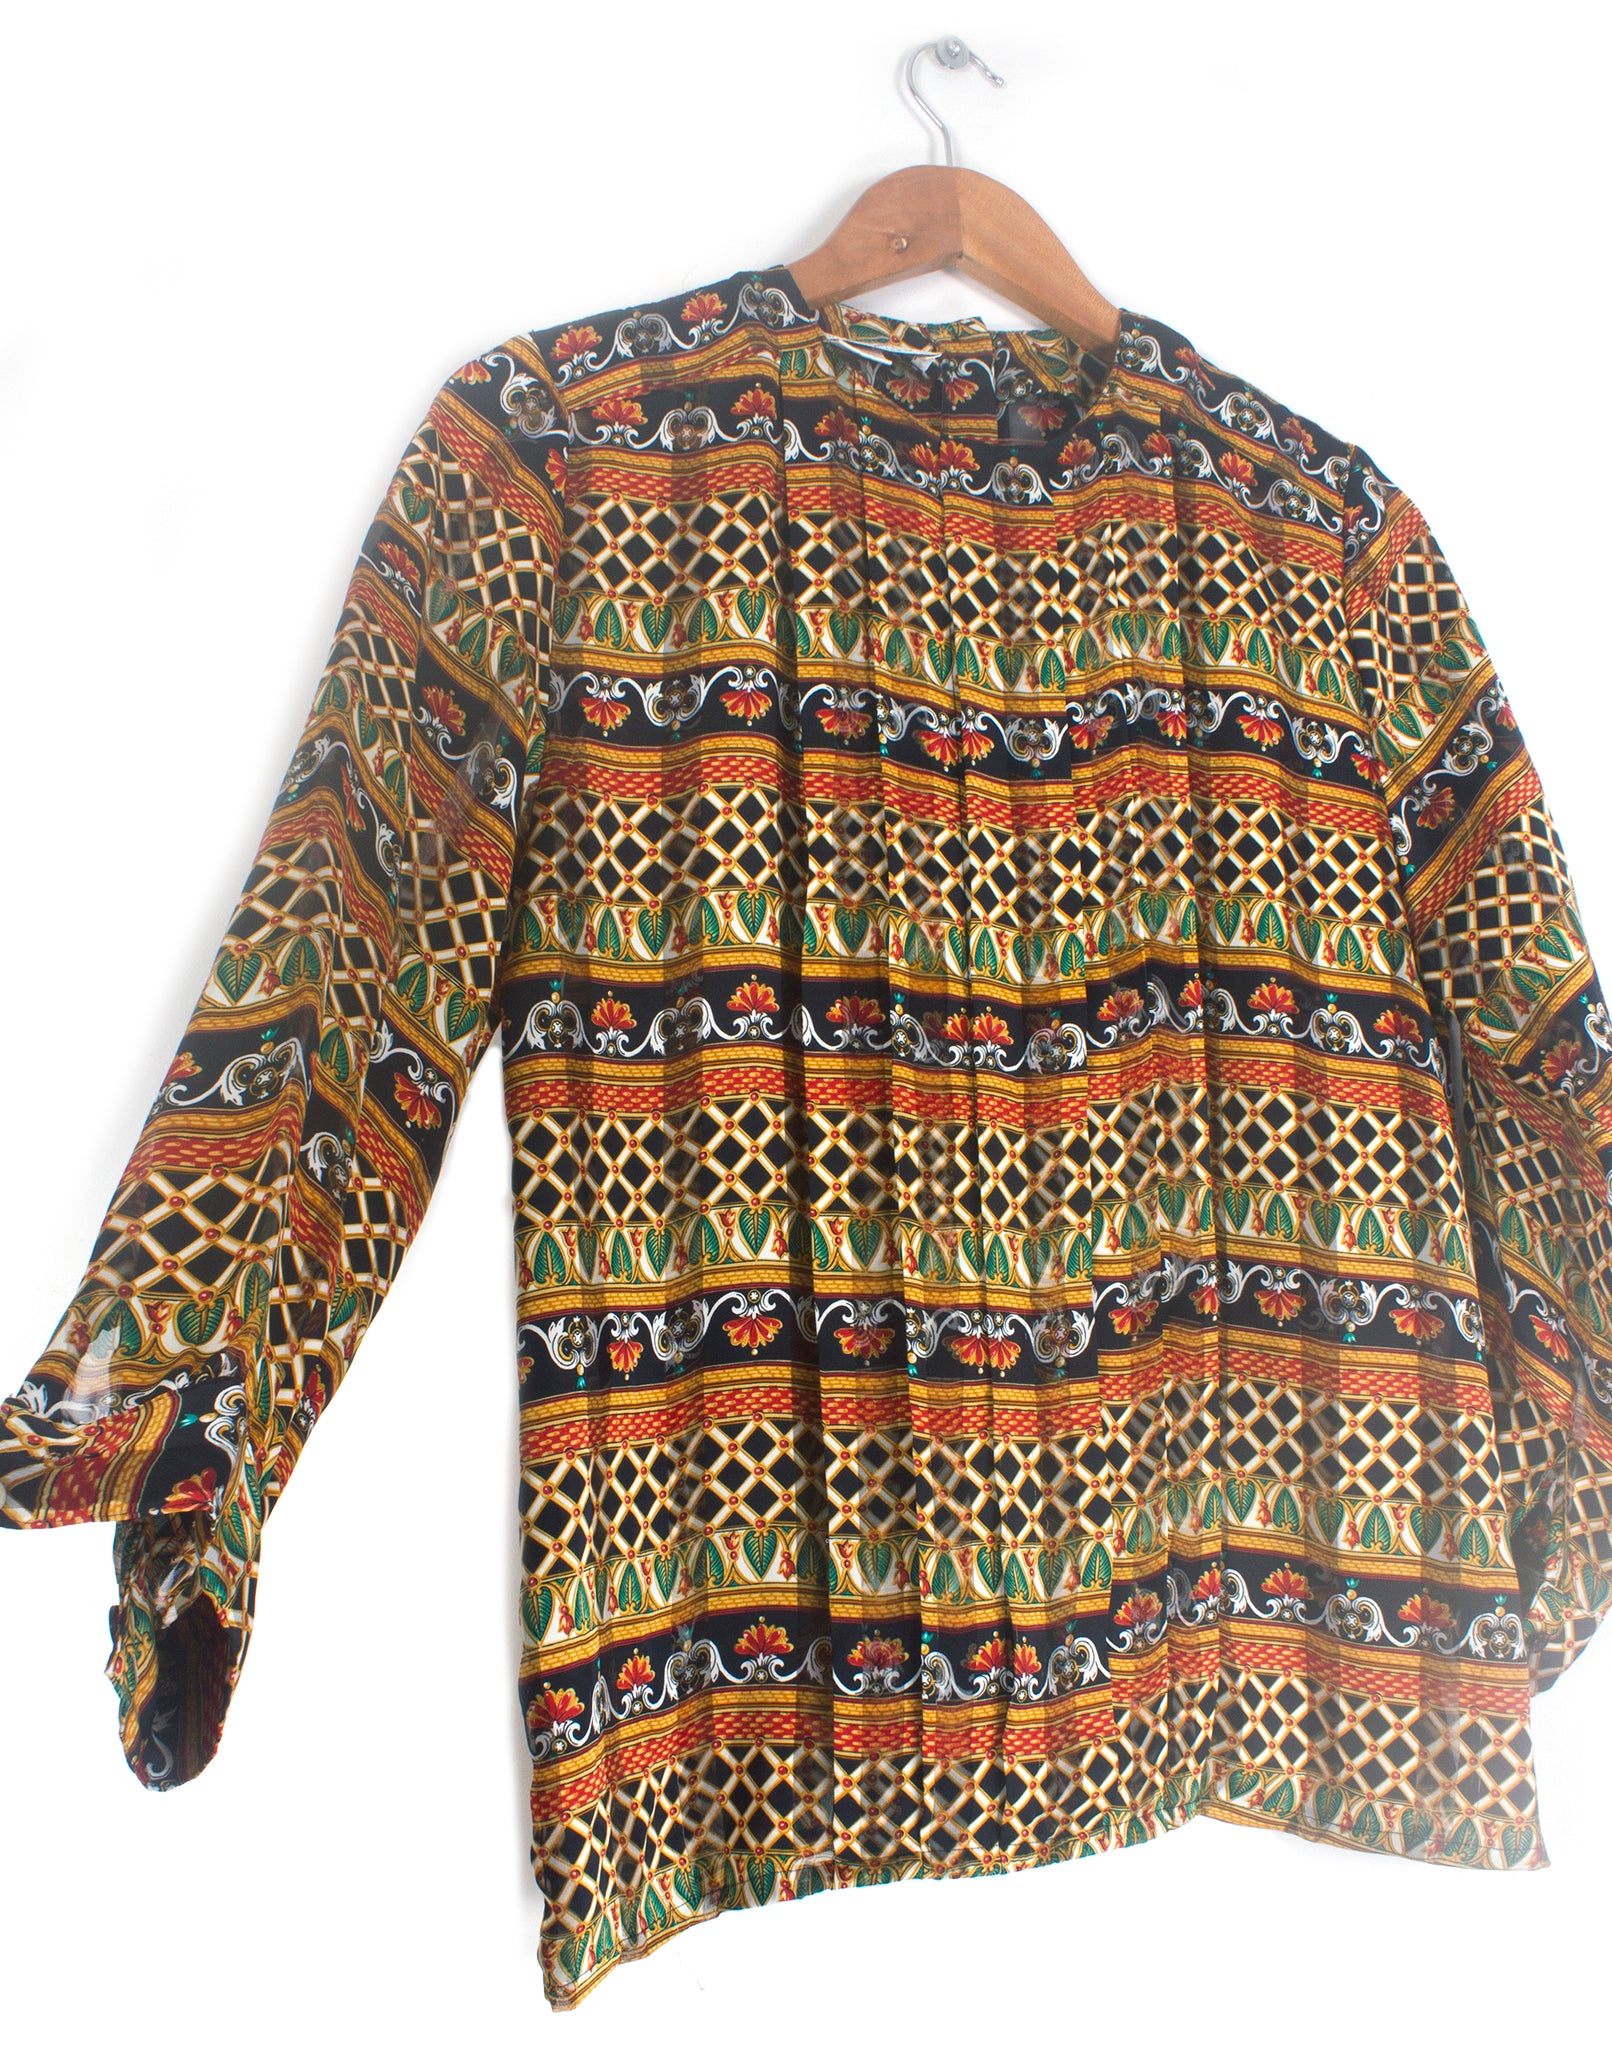 Vintage 80's Graphic Long Sleeve Blouse - Size XS S